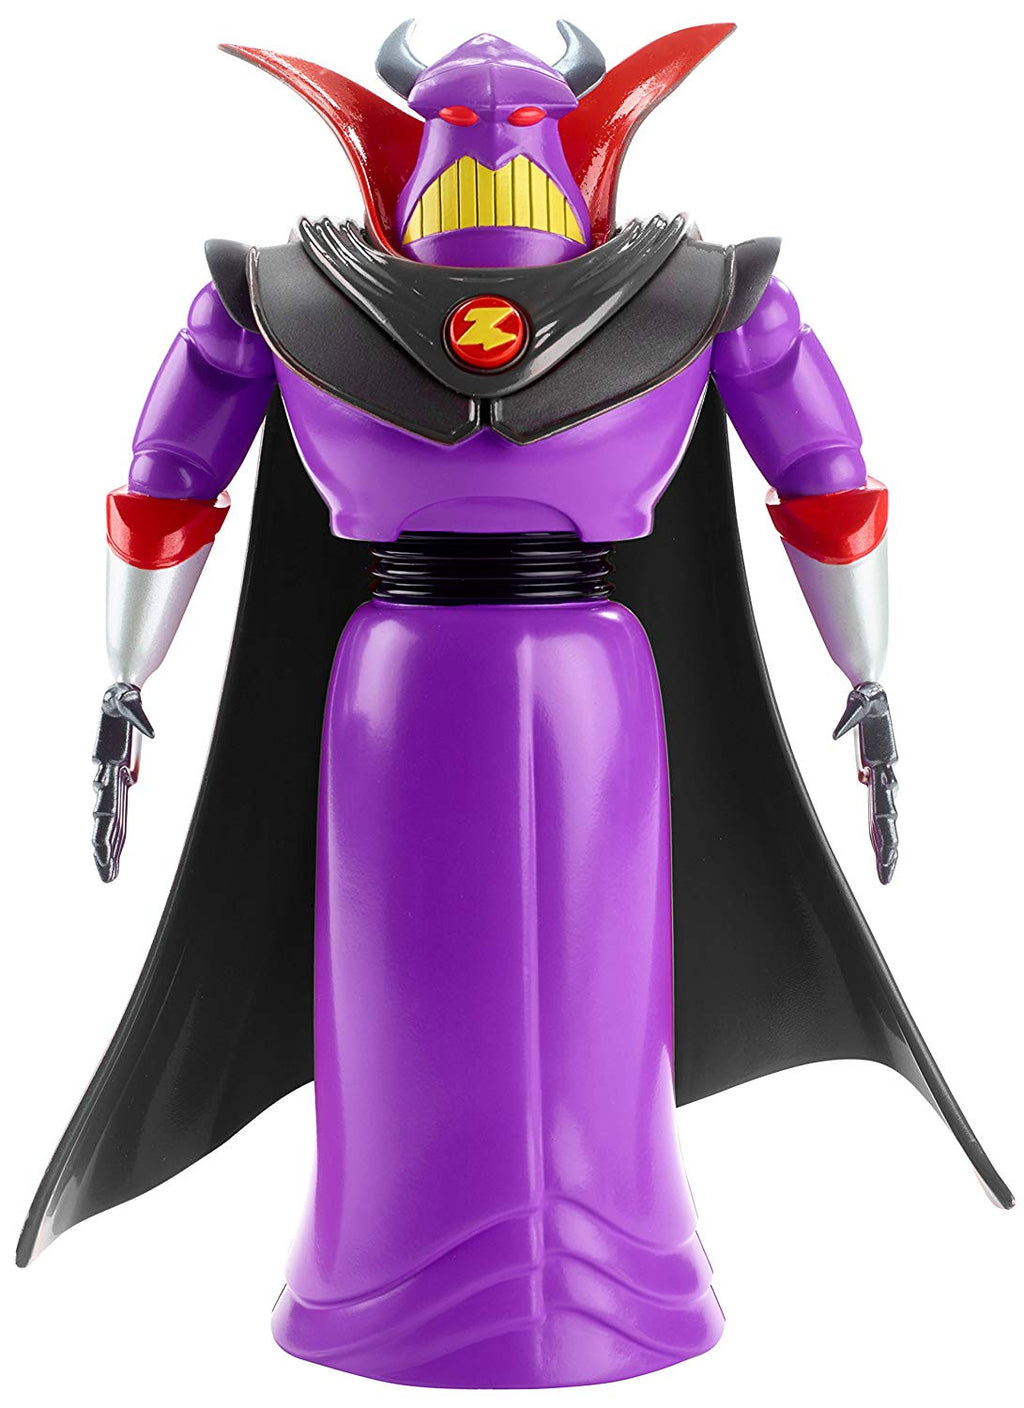 toy story collection zurg